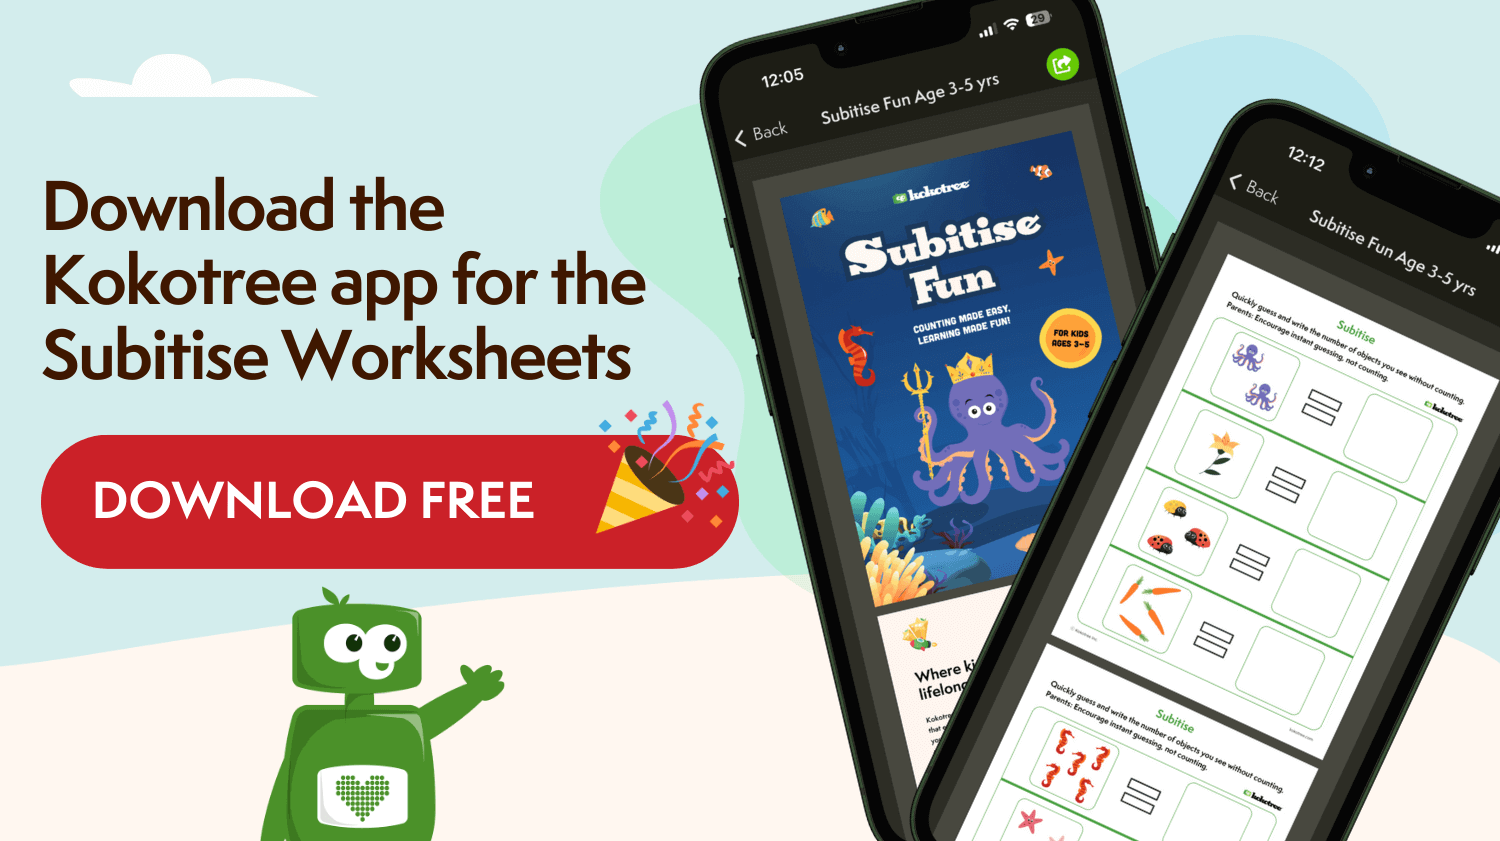 Download the Kokotree app for the Subitise Worksheets